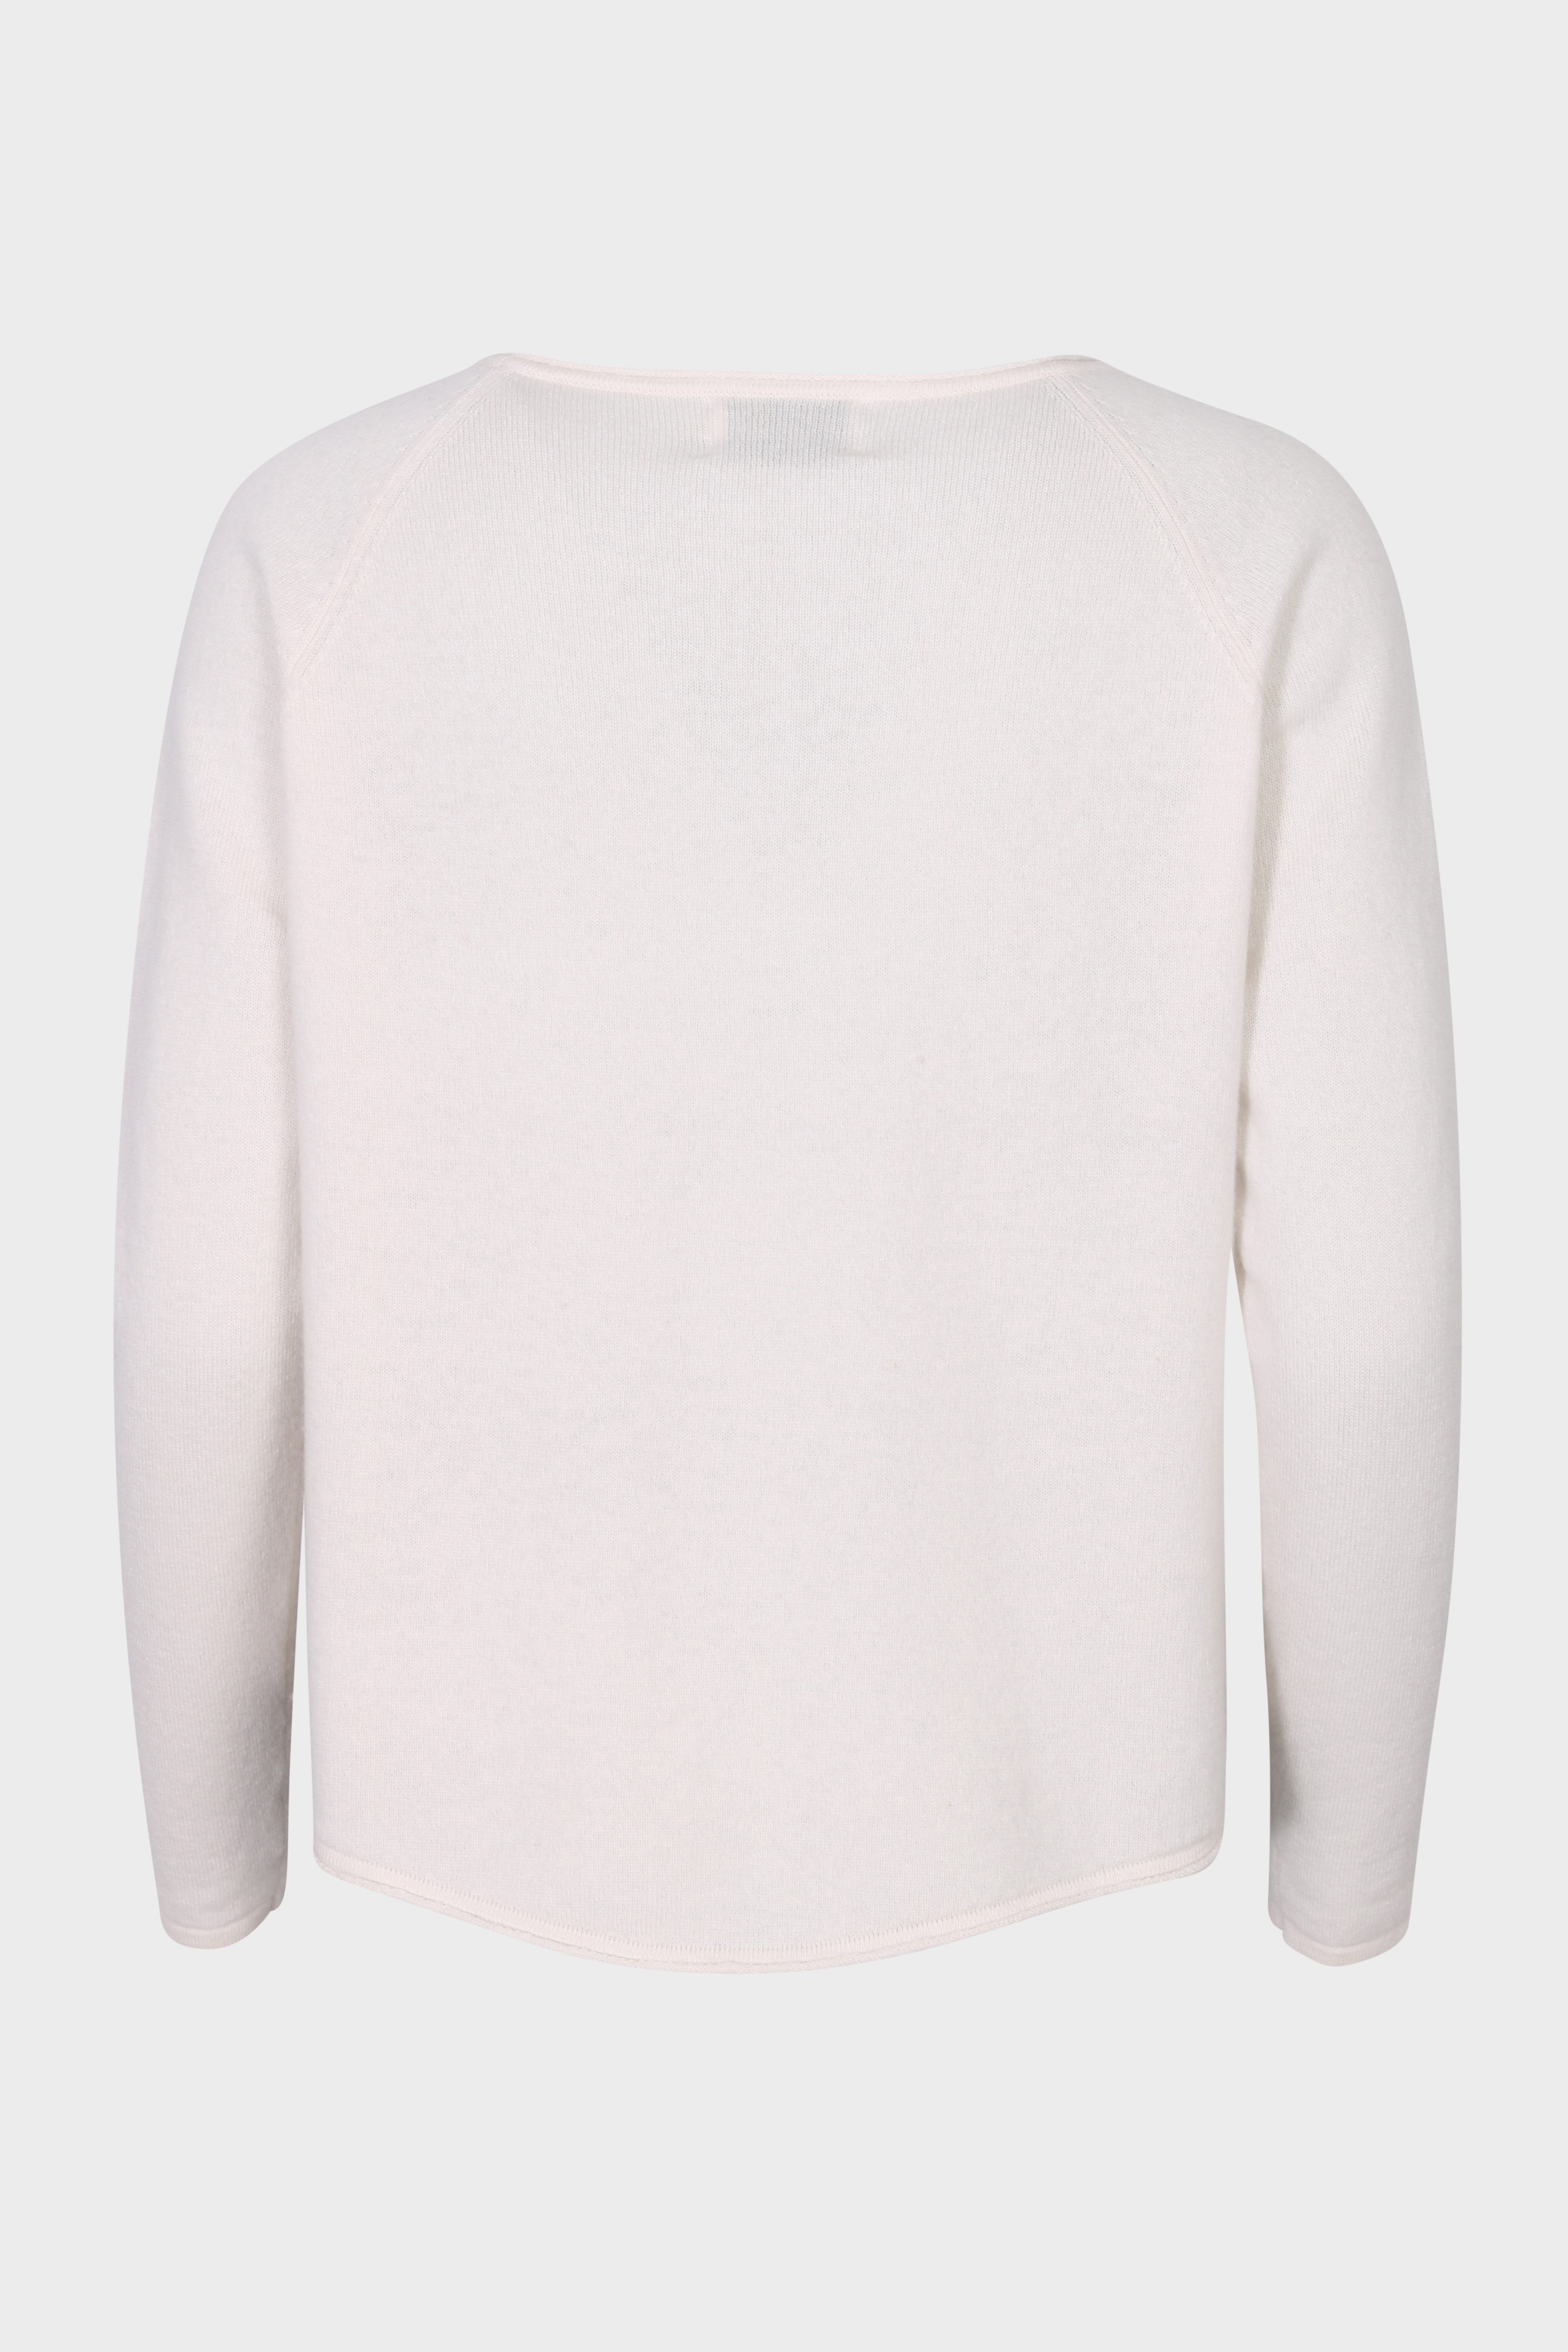 FLONA Cashmere Sweater in Offwhite XS